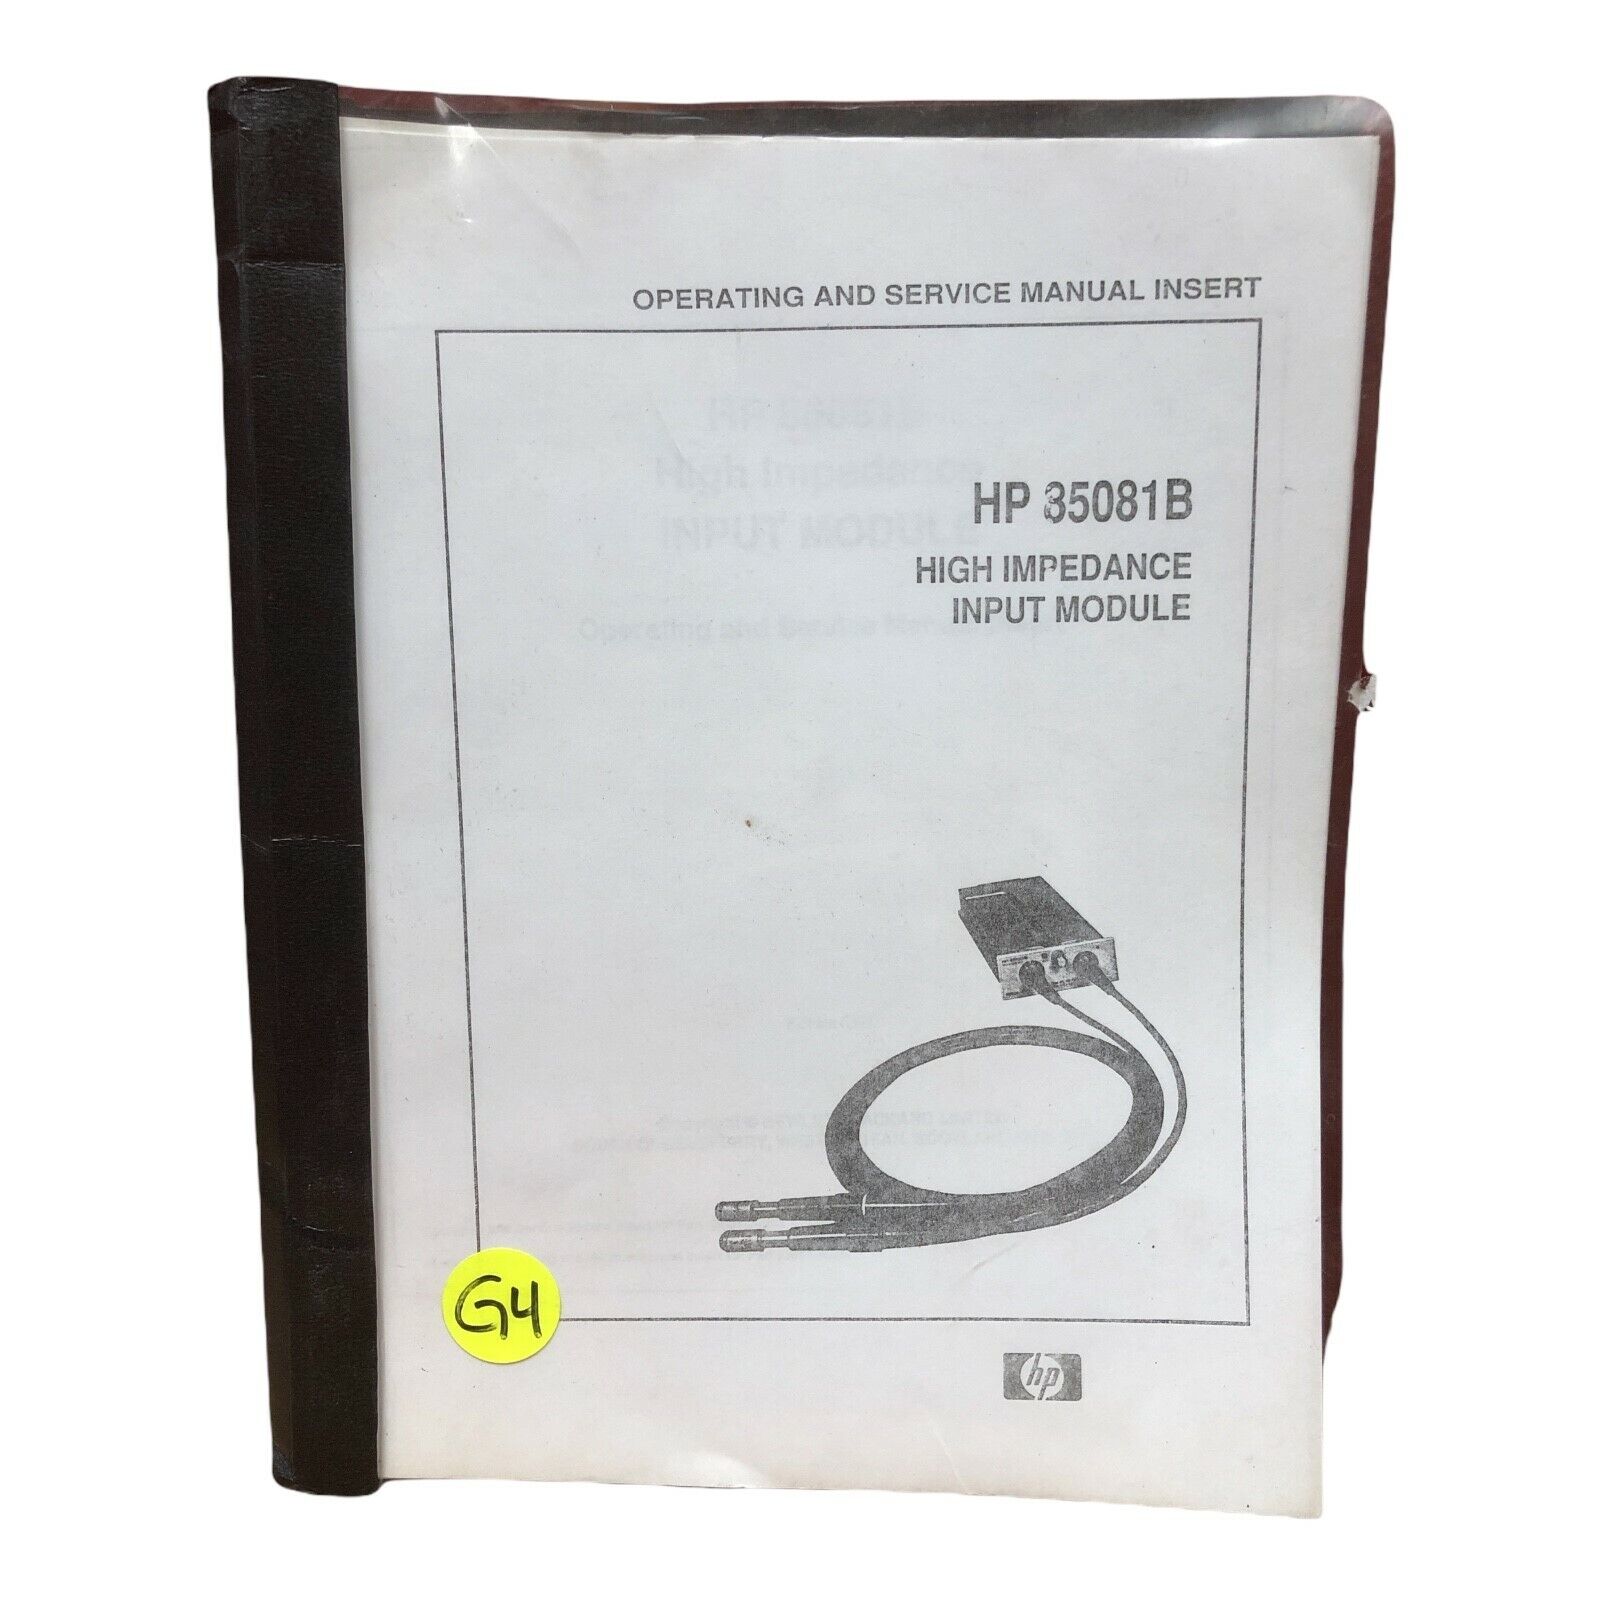 HP 35081B HIGH IMPEDENCE INPUT MODULE OPERATING AND SERVICE MANUAL INSERT